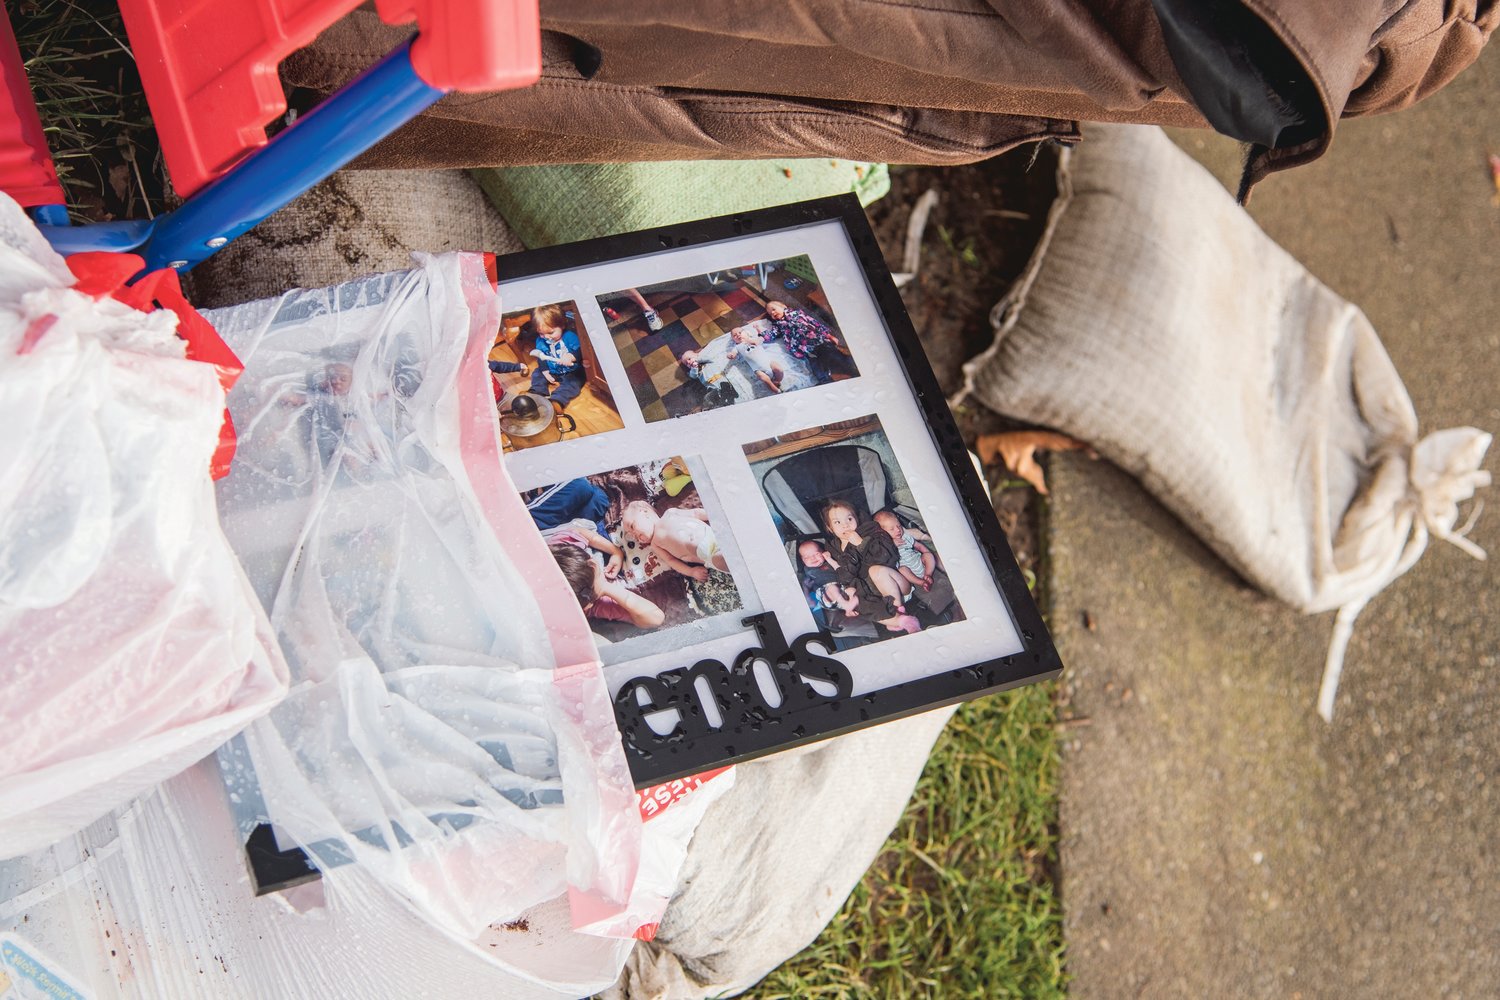 Pictures sit among the remains of damaged furniture on top of sandbags outside the Chehalis Avenue Apartments on Wednesday.